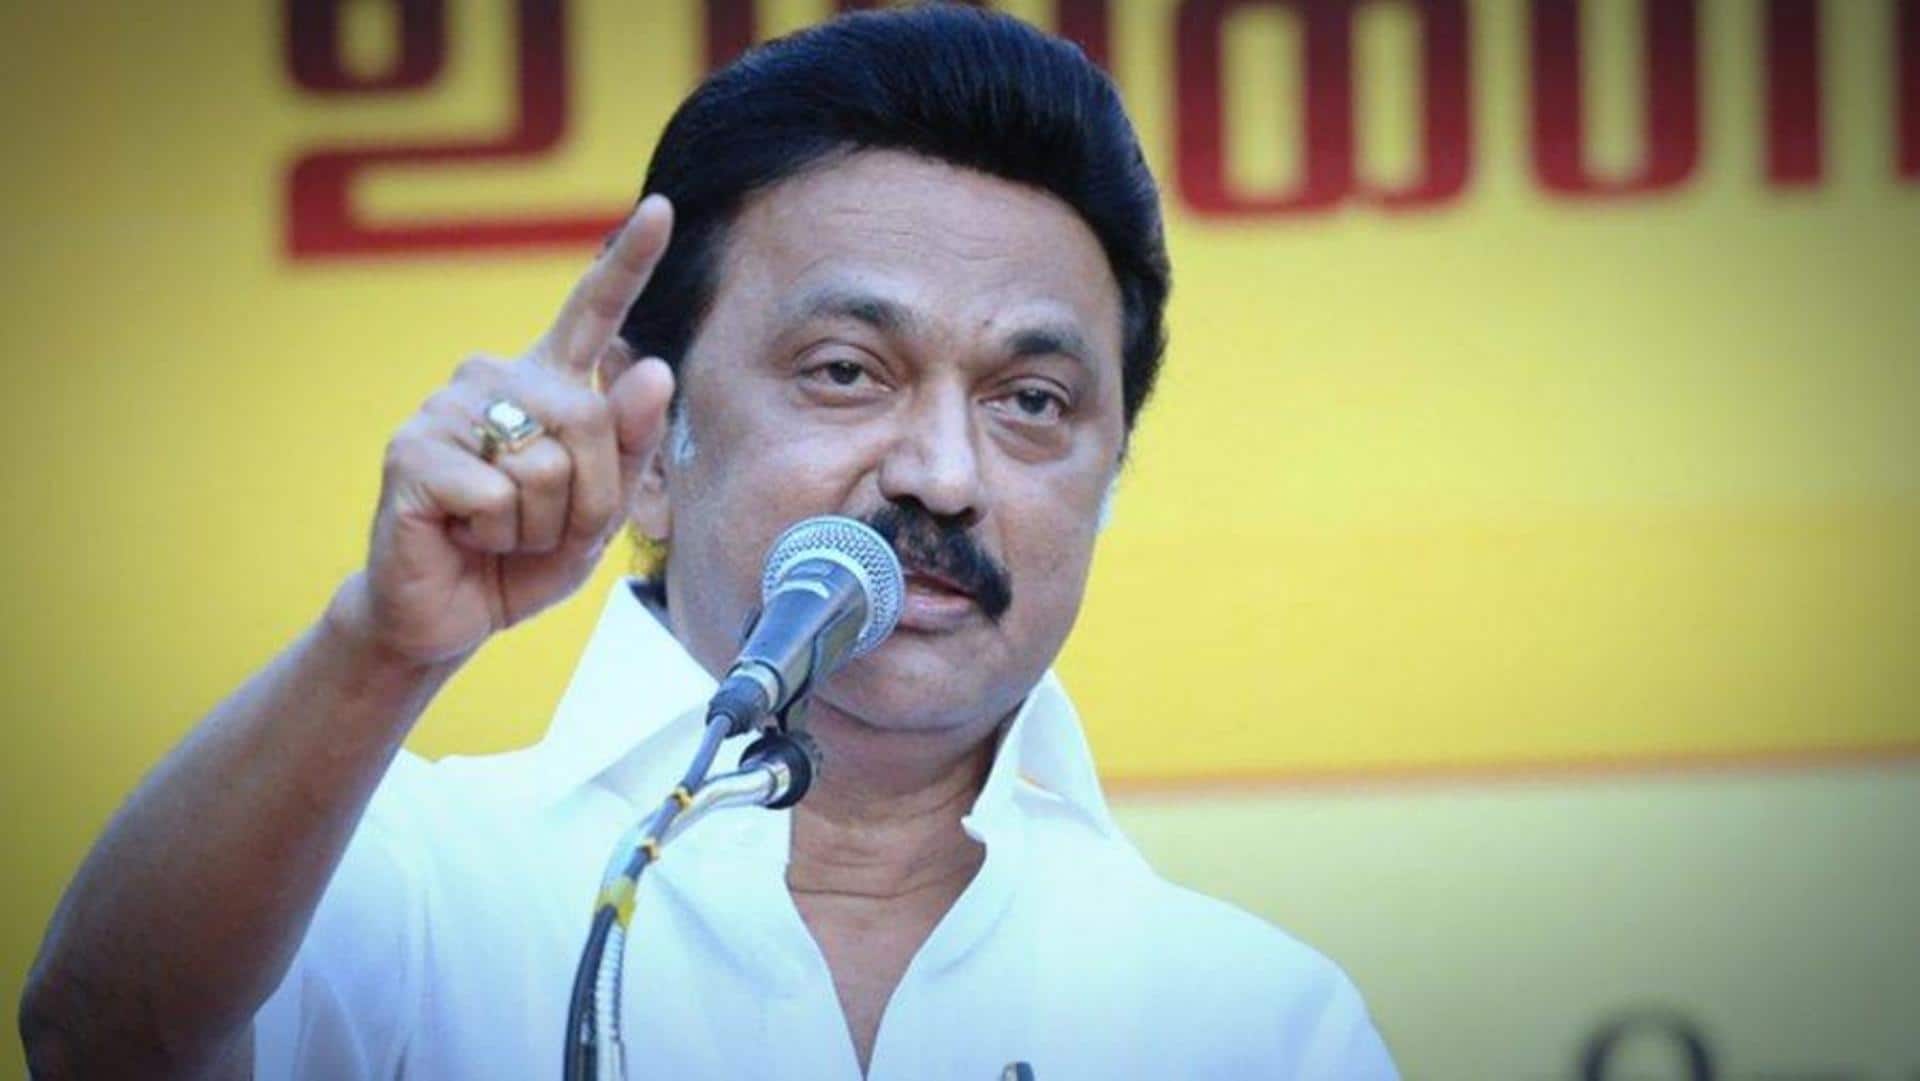 UCC could create unrest in country: Stalin after Modi's pitch